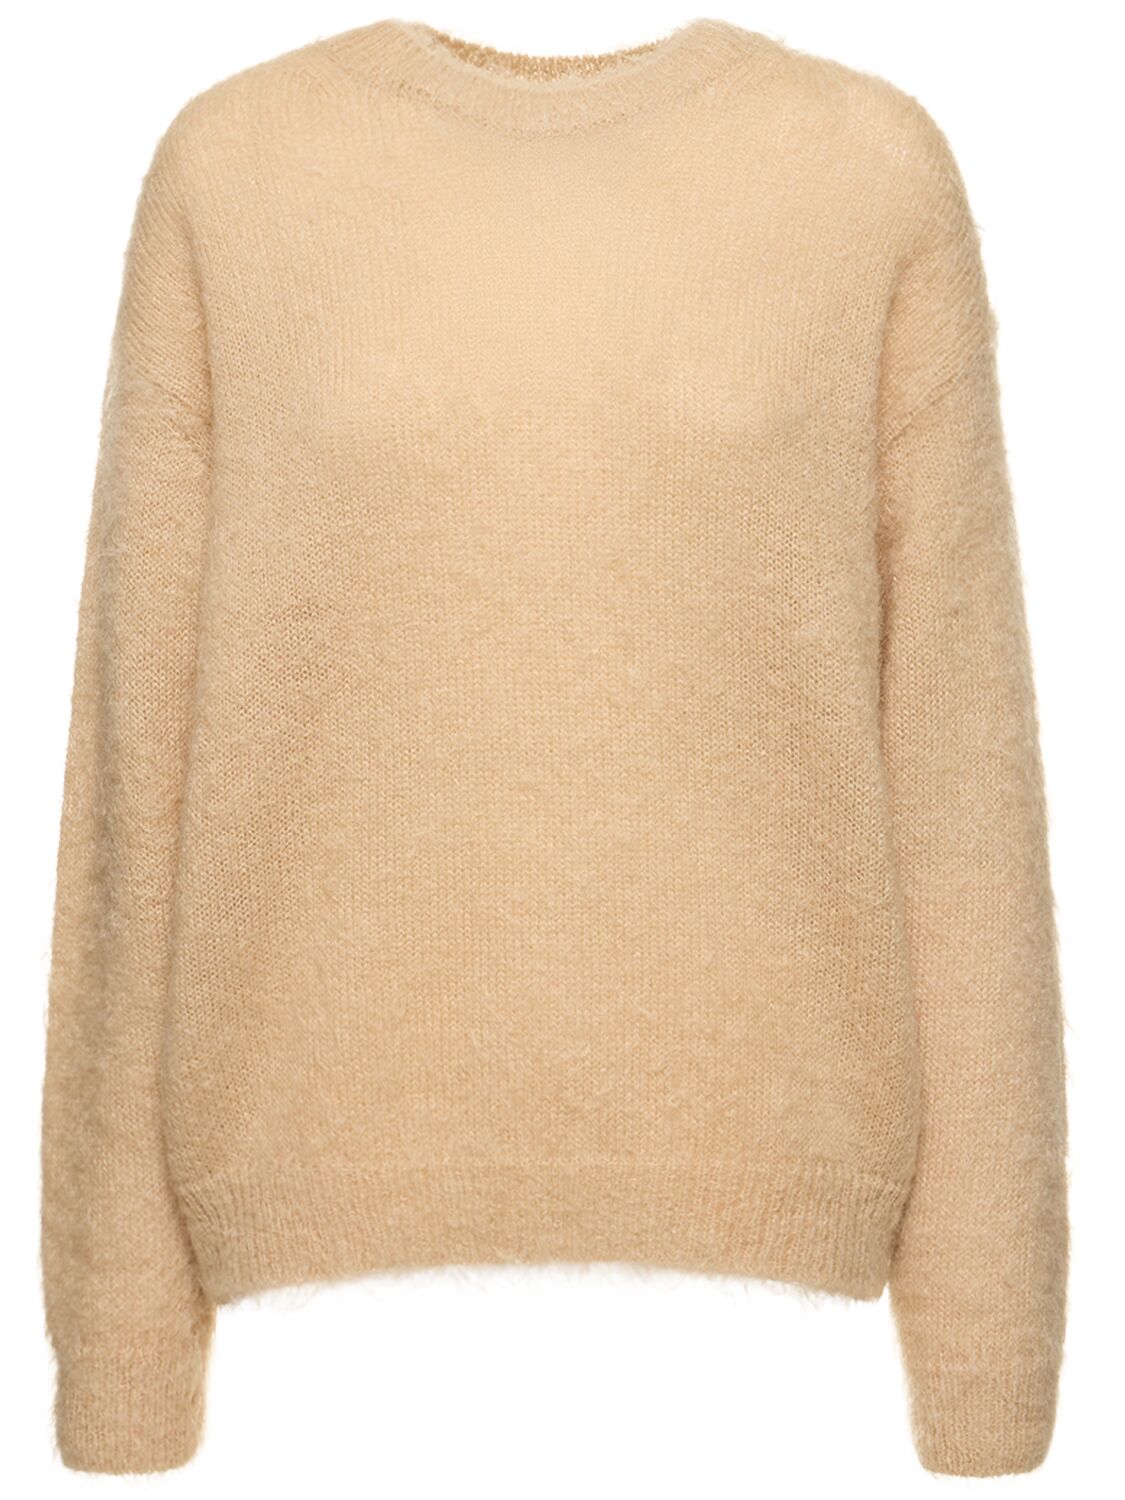 Image of Brushed Super Kid Mohair Knit Sweater